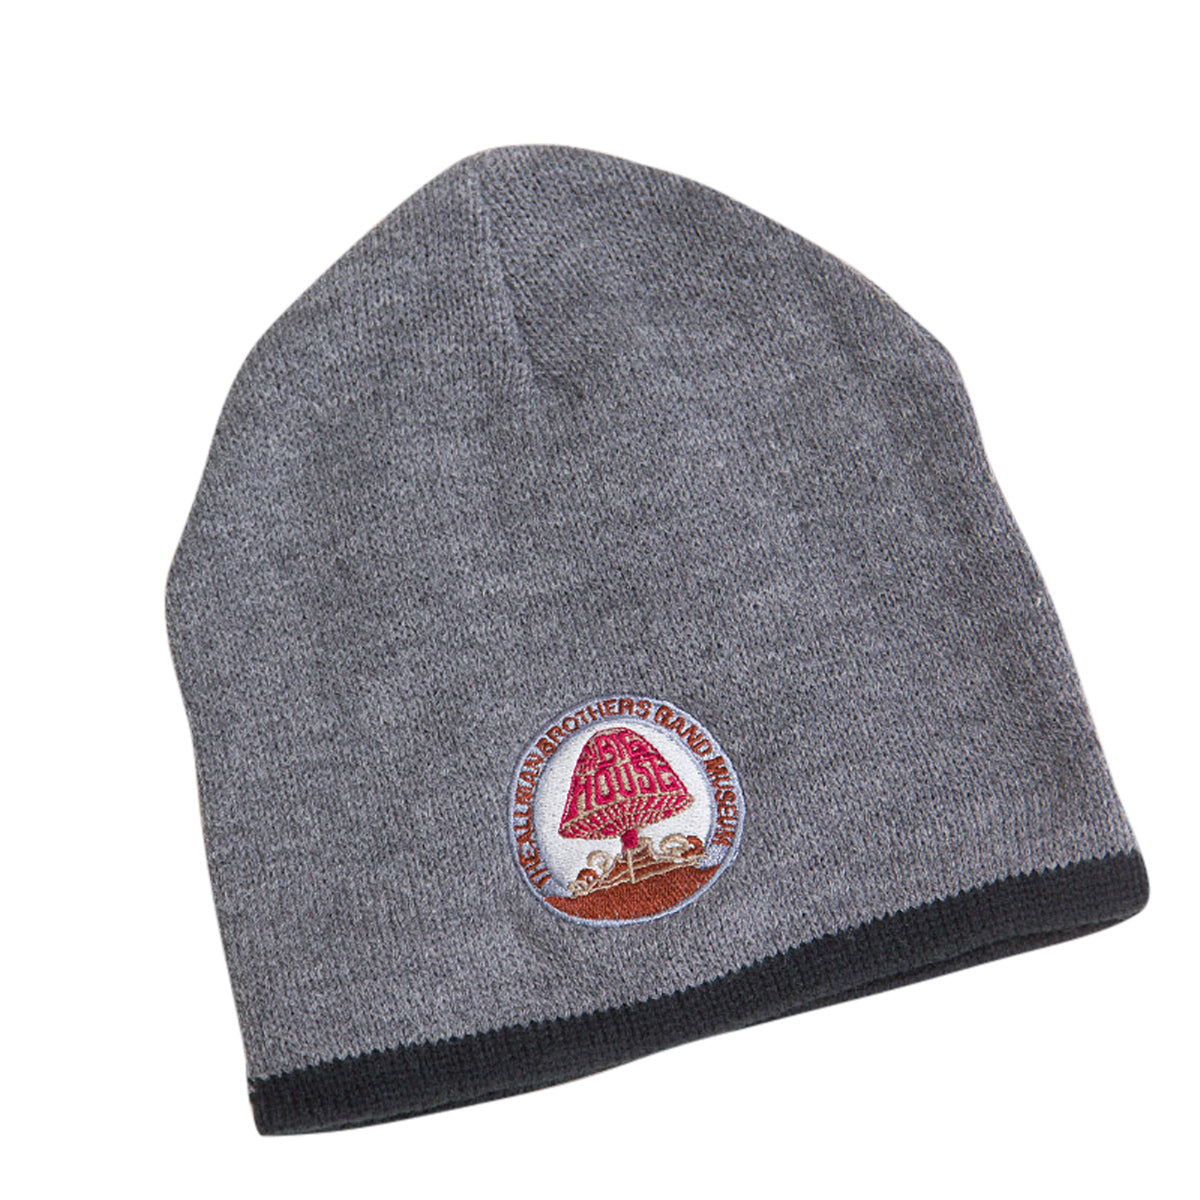 Allman Brothers Band Knitted Ski Cap